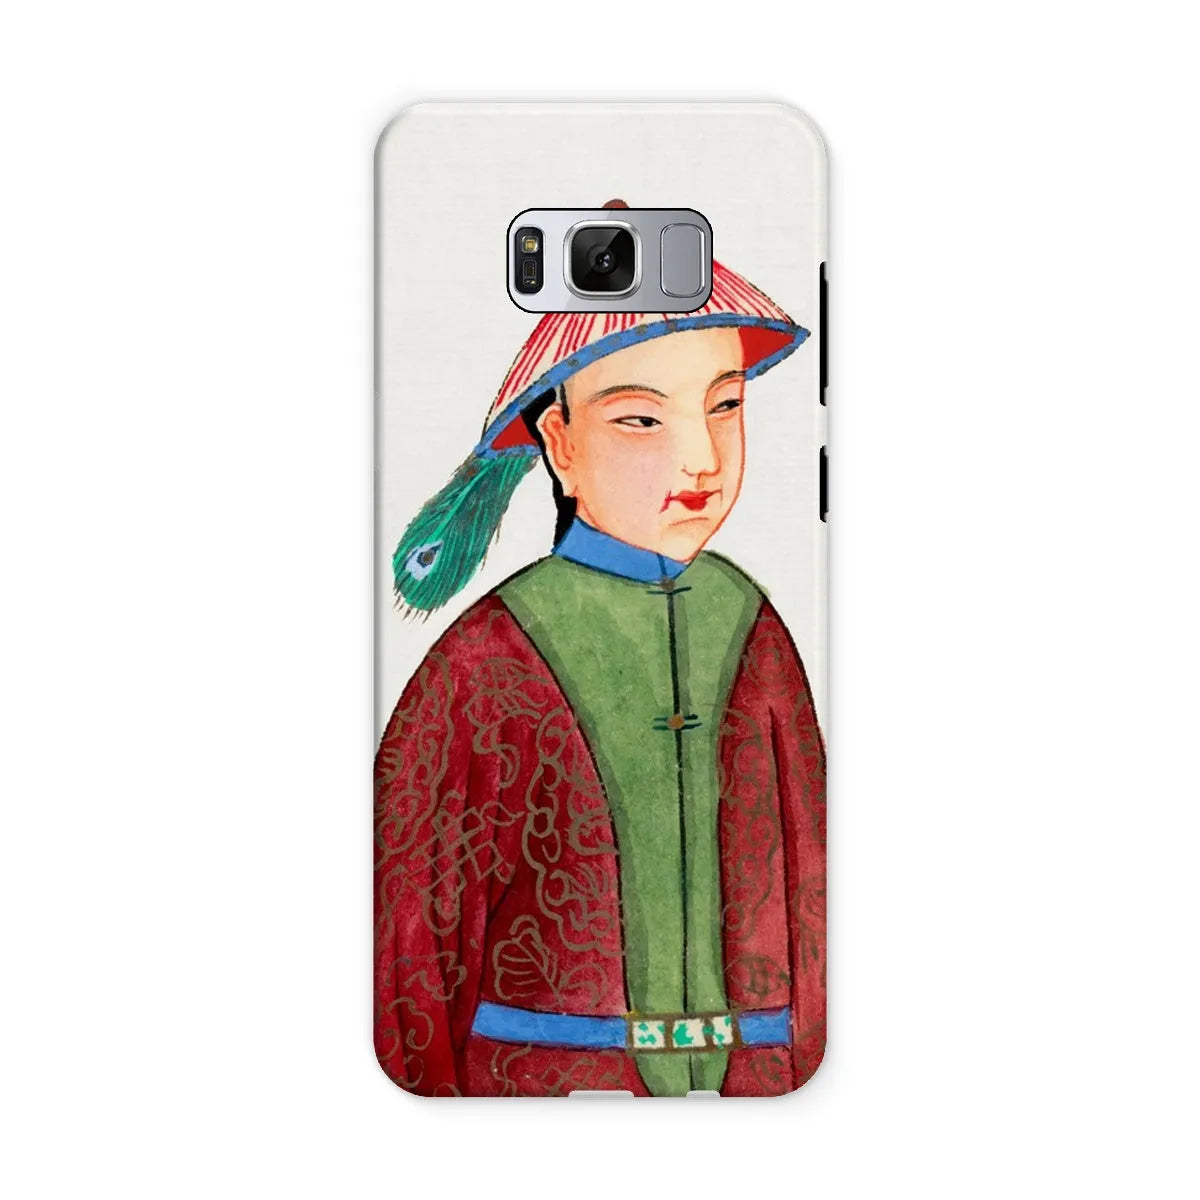 Manchu Dandy - Chinese Aesthetic Art Phone Case - Samsung Galaxy S8 / Matte - Mobile Phone Cases - Aesthetic Art